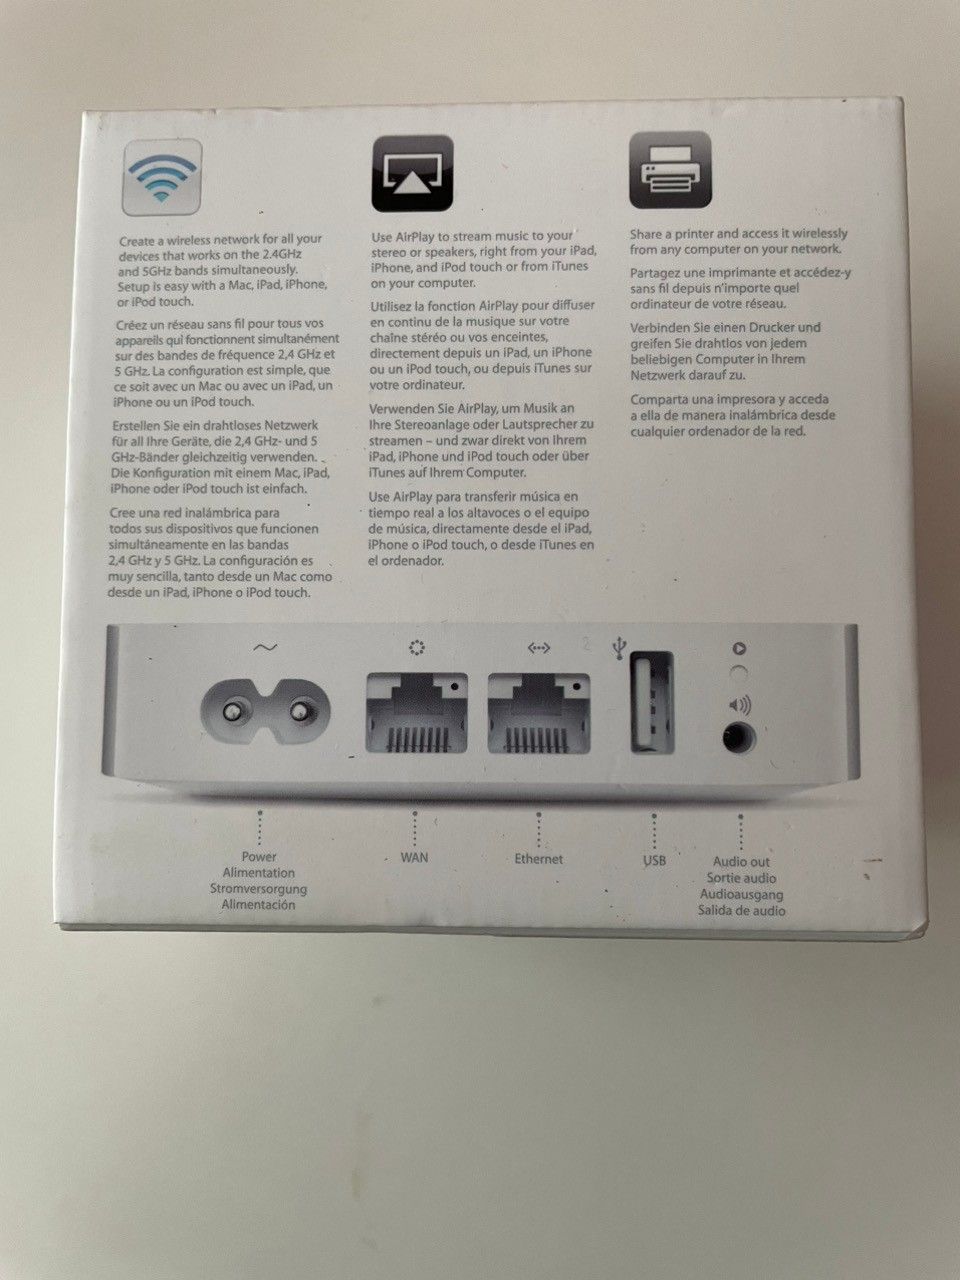 Apple AirPort Express MC4142/A Base Station model A1392